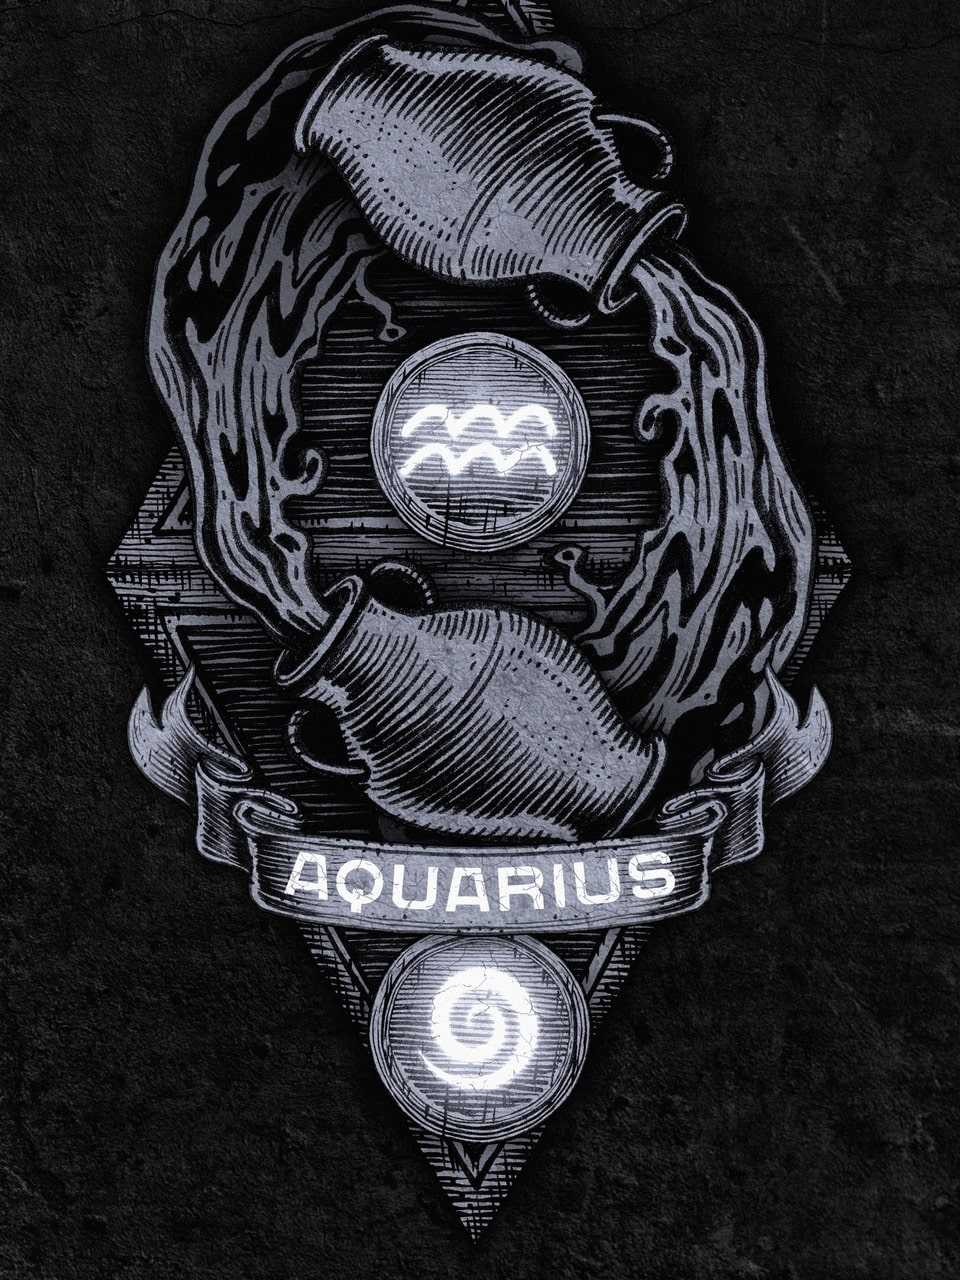 Aquarius - The Water Bearer - Astrology - Horoscope - Black and White -<ref> The design</ref><box>(109,5),(888,971)</box> is embroidered - Aquarius